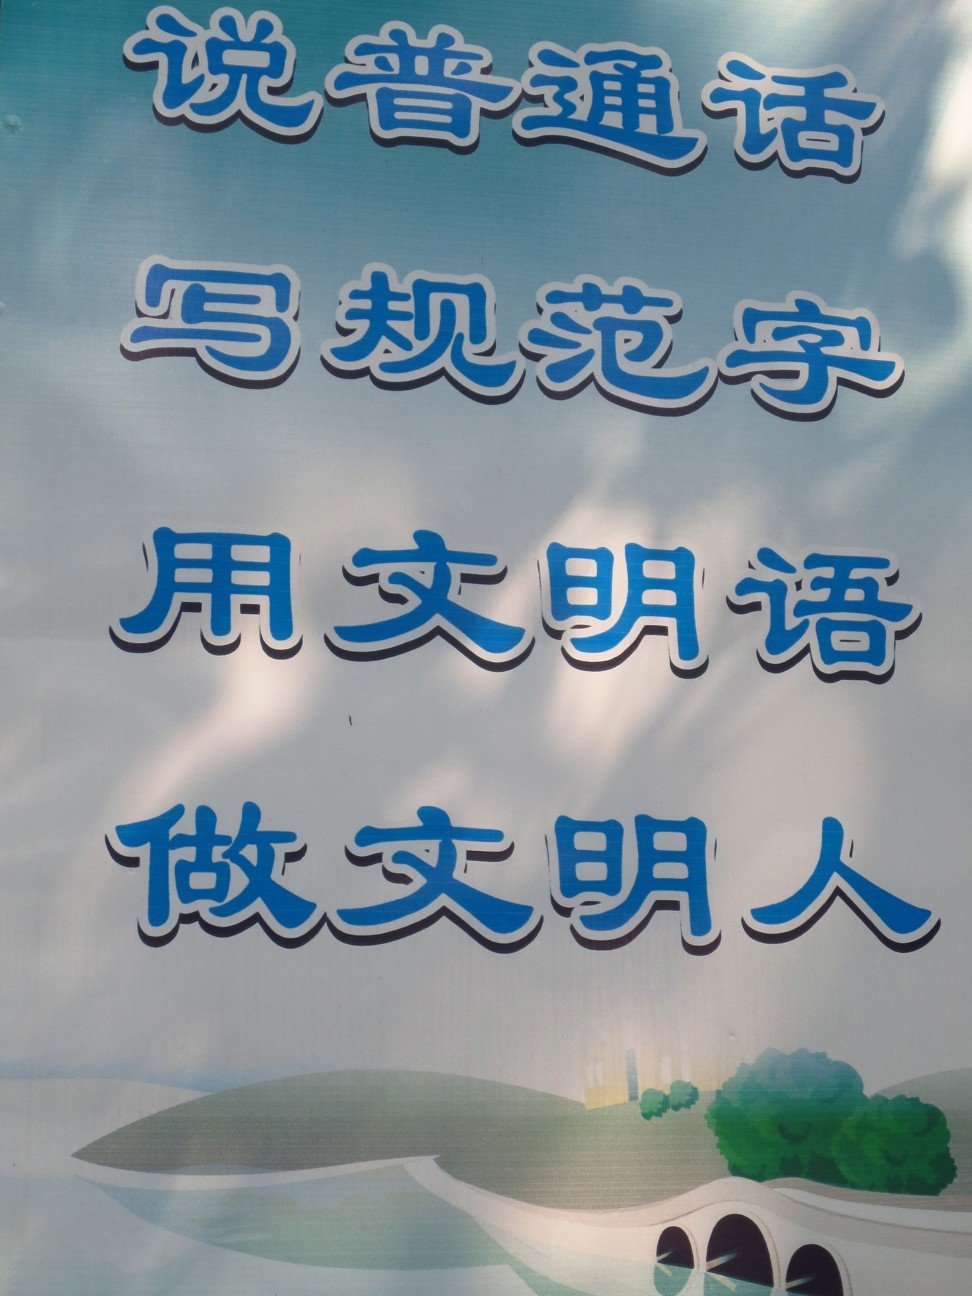 A sign in Guangzhou encourages people to speak Mandarin and write in simplified Chinese characters, adding “Use civilised language – Be a civilised person”. Photo: SCMP pictures